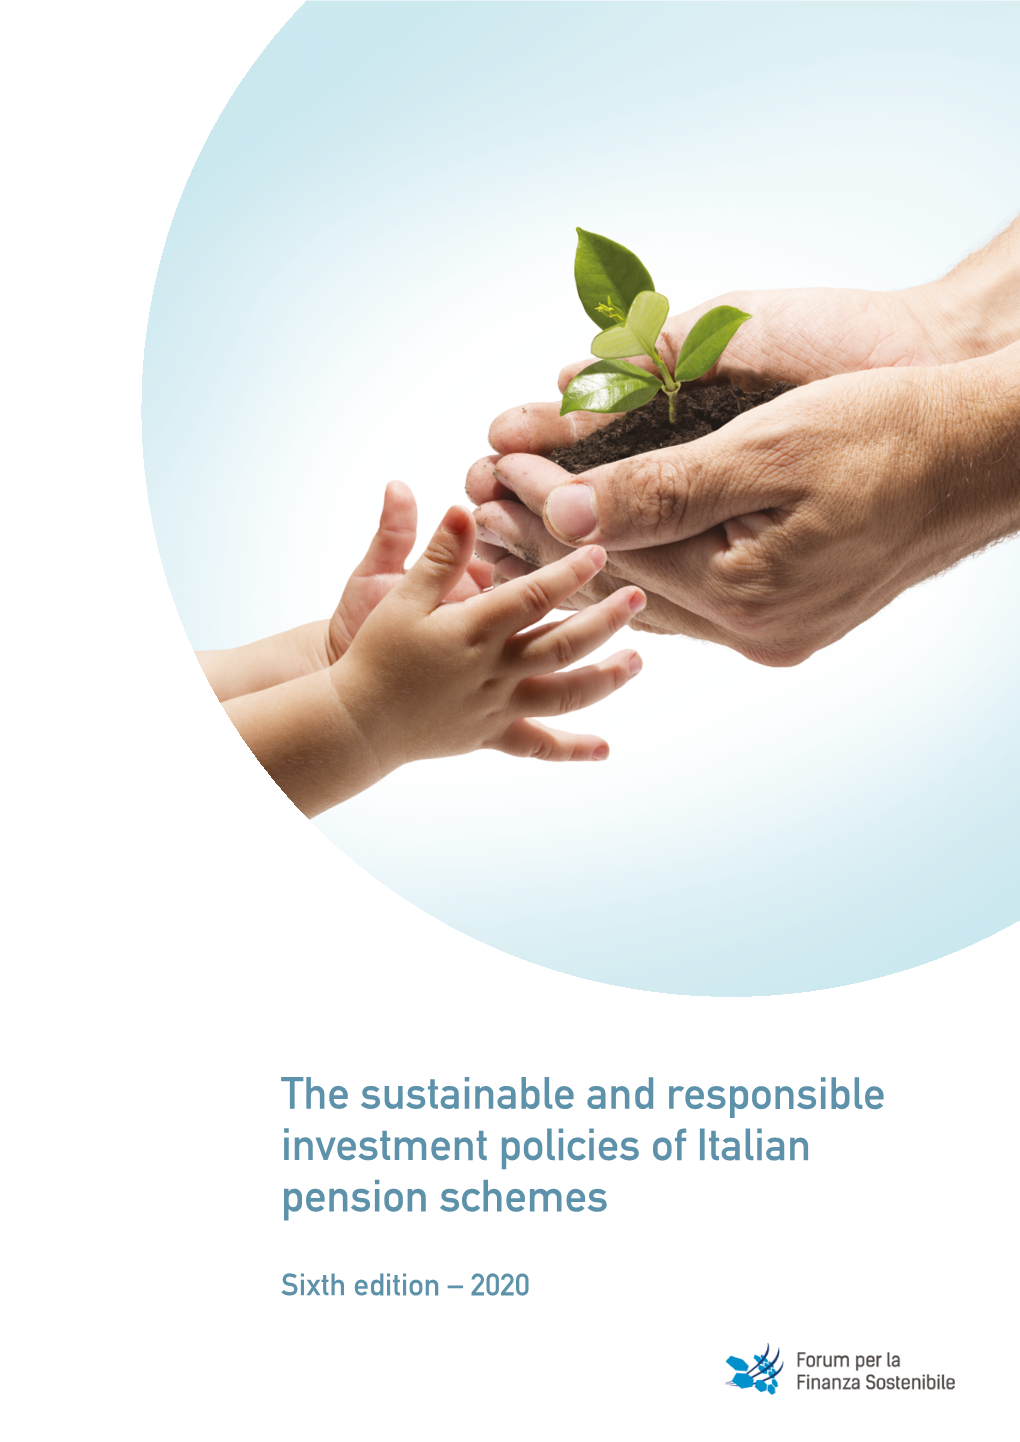 The Sustainable and Responsible Investment Policies of Italian Pension Schemes